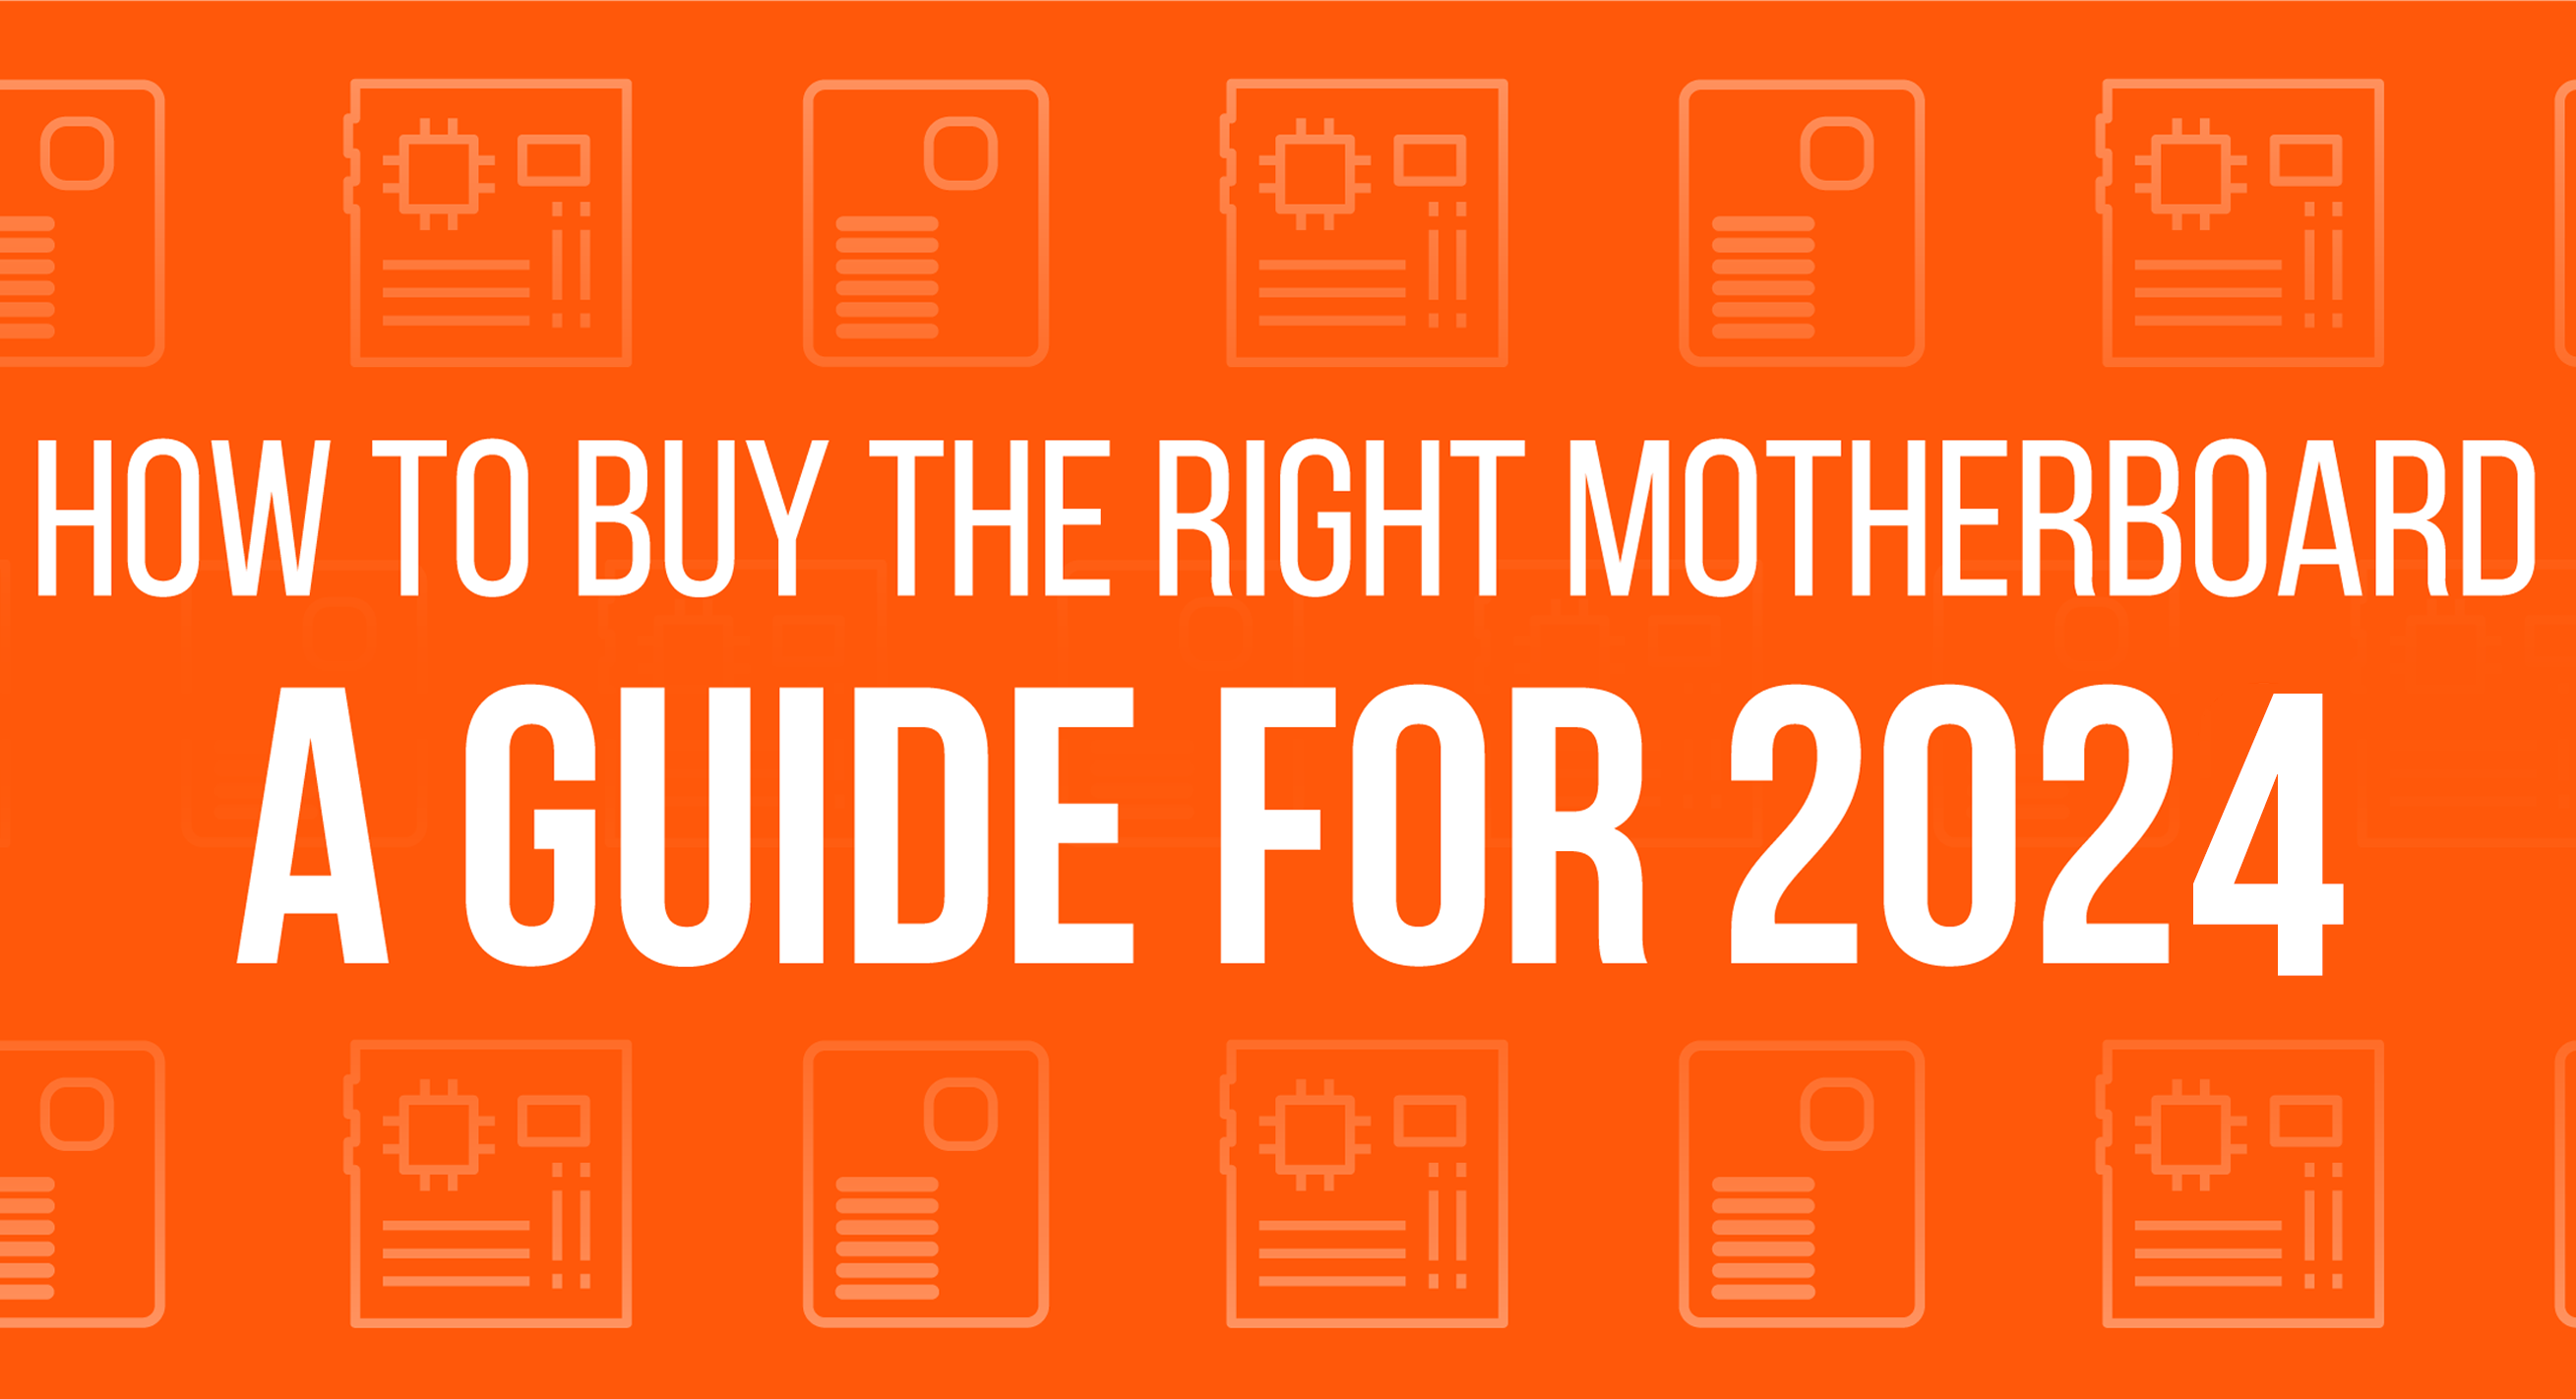 How to Buy the Right Motherboard | A Guide for 2022